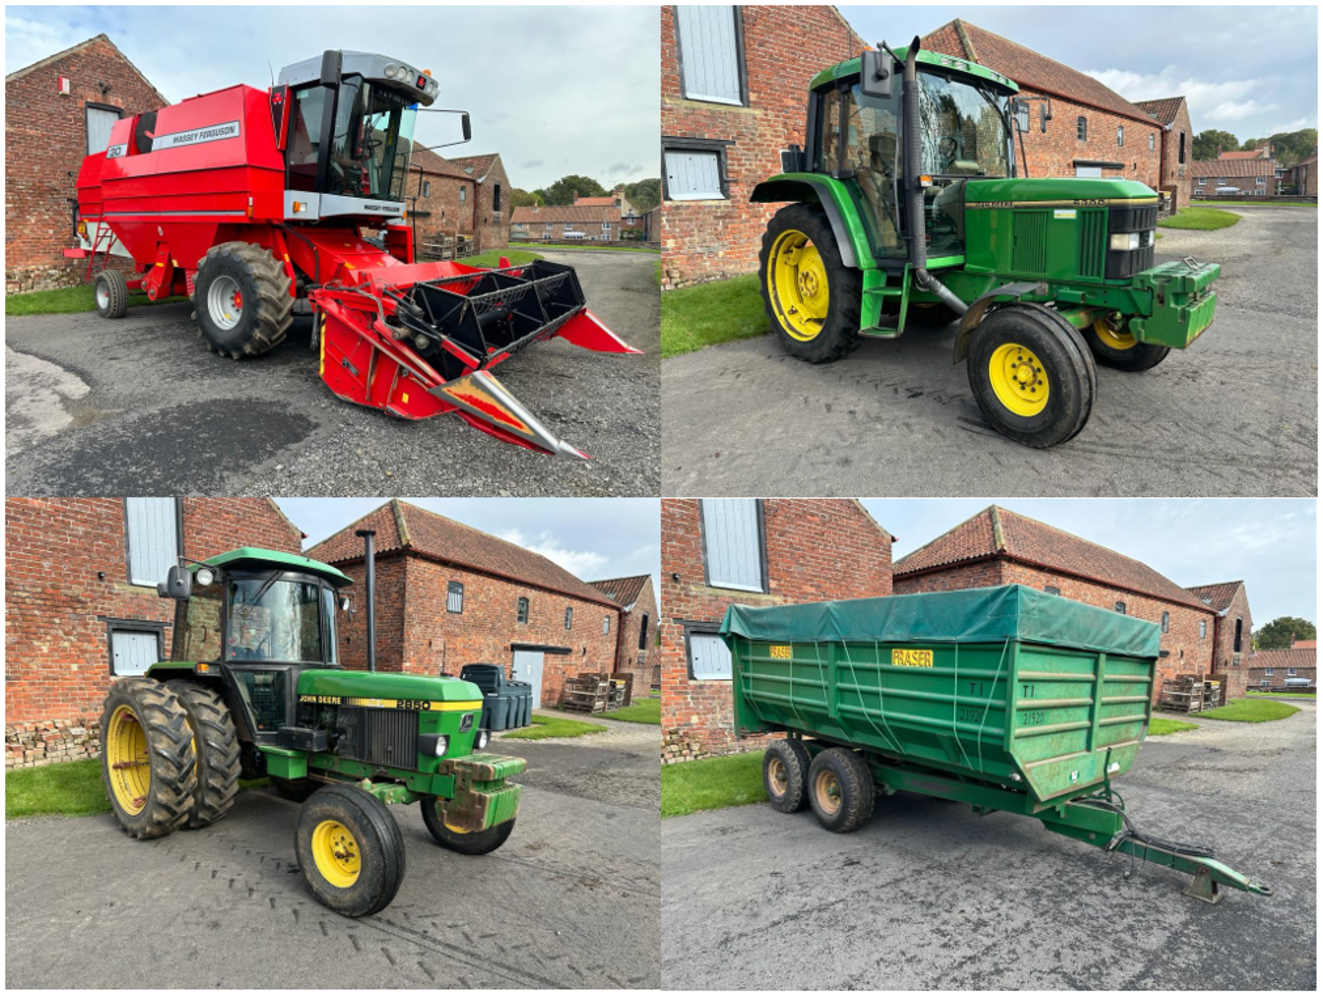 Sale by Auction of Well Maintained Classic & Vintage Farm Machinery